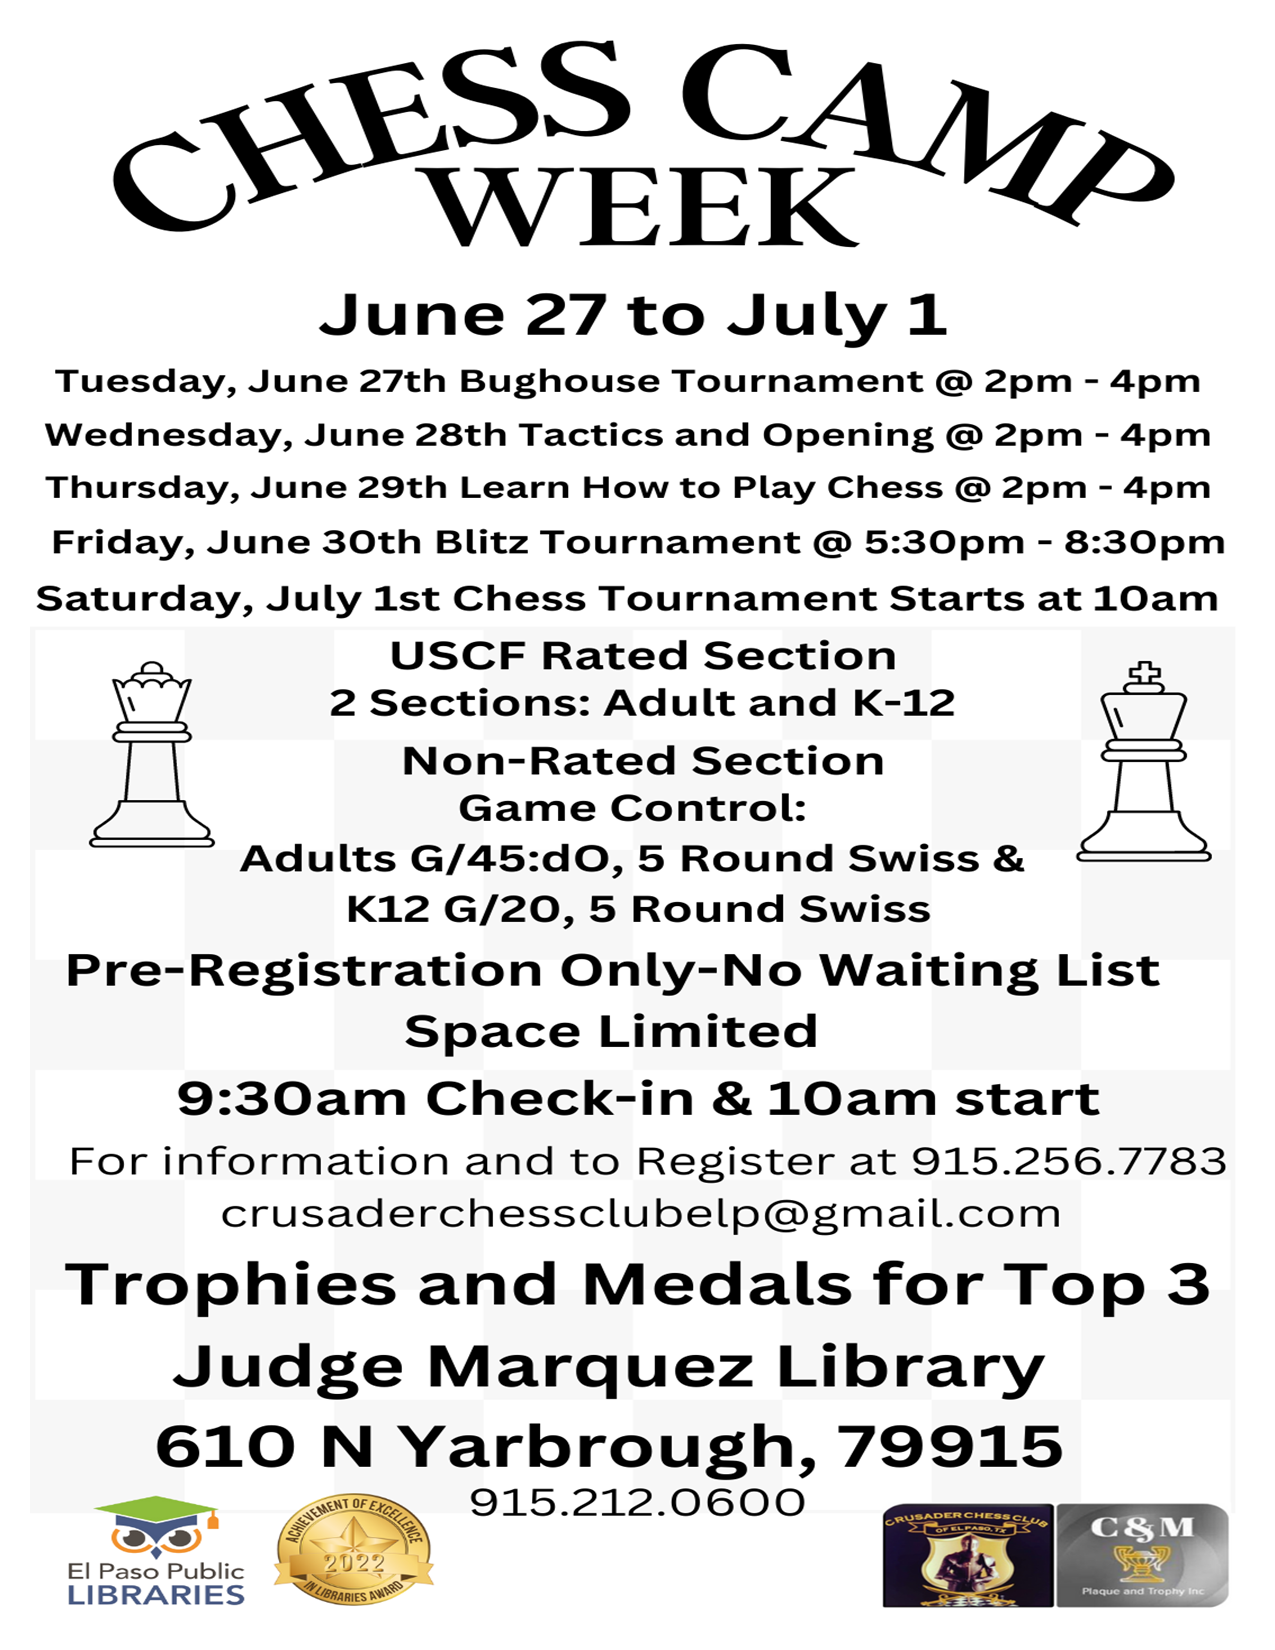 Judge Marquez Library Chess Camp 2 the Library!